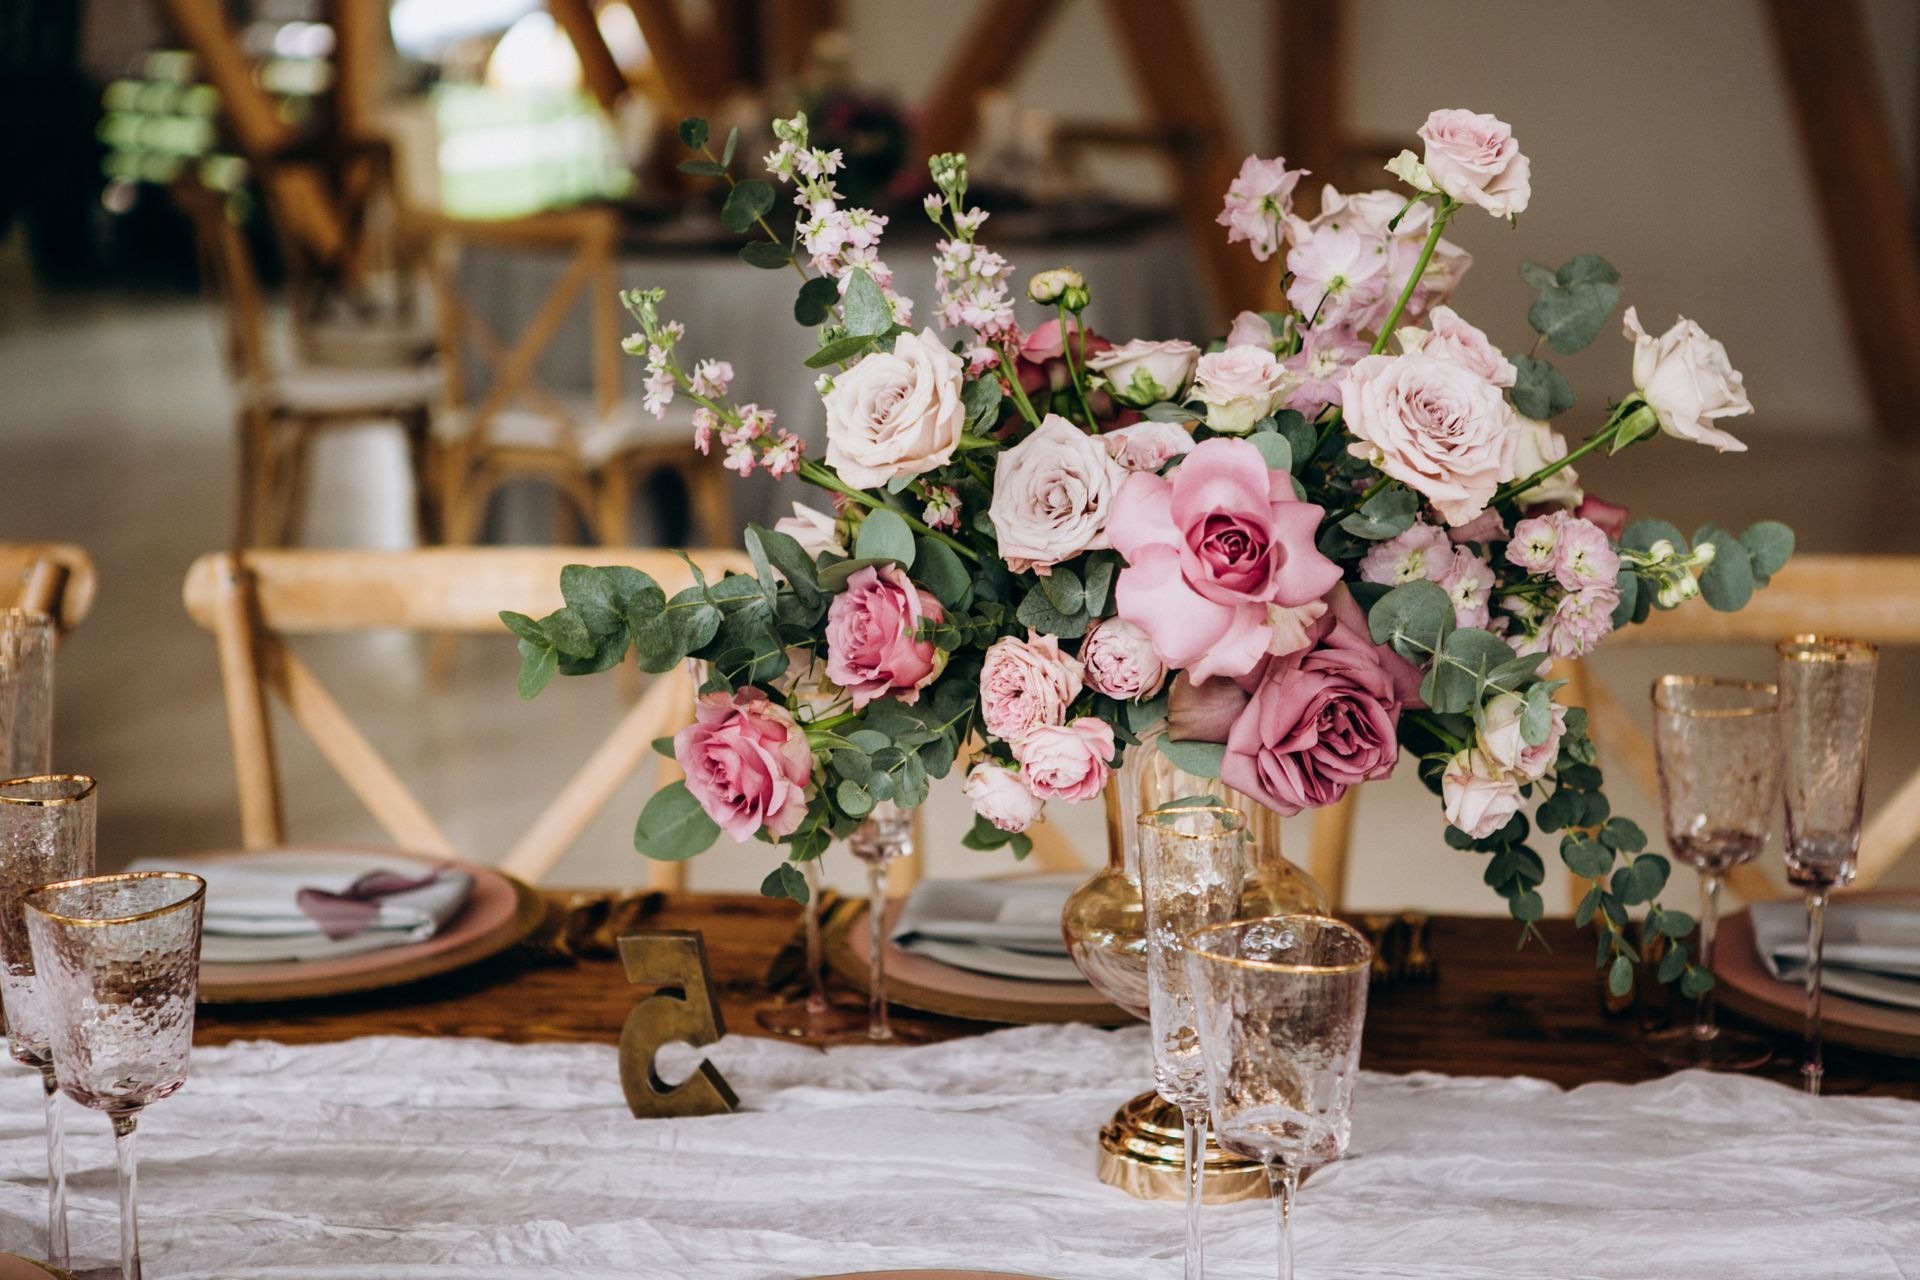 Roses in a vase on a table set for rustic wedding reception